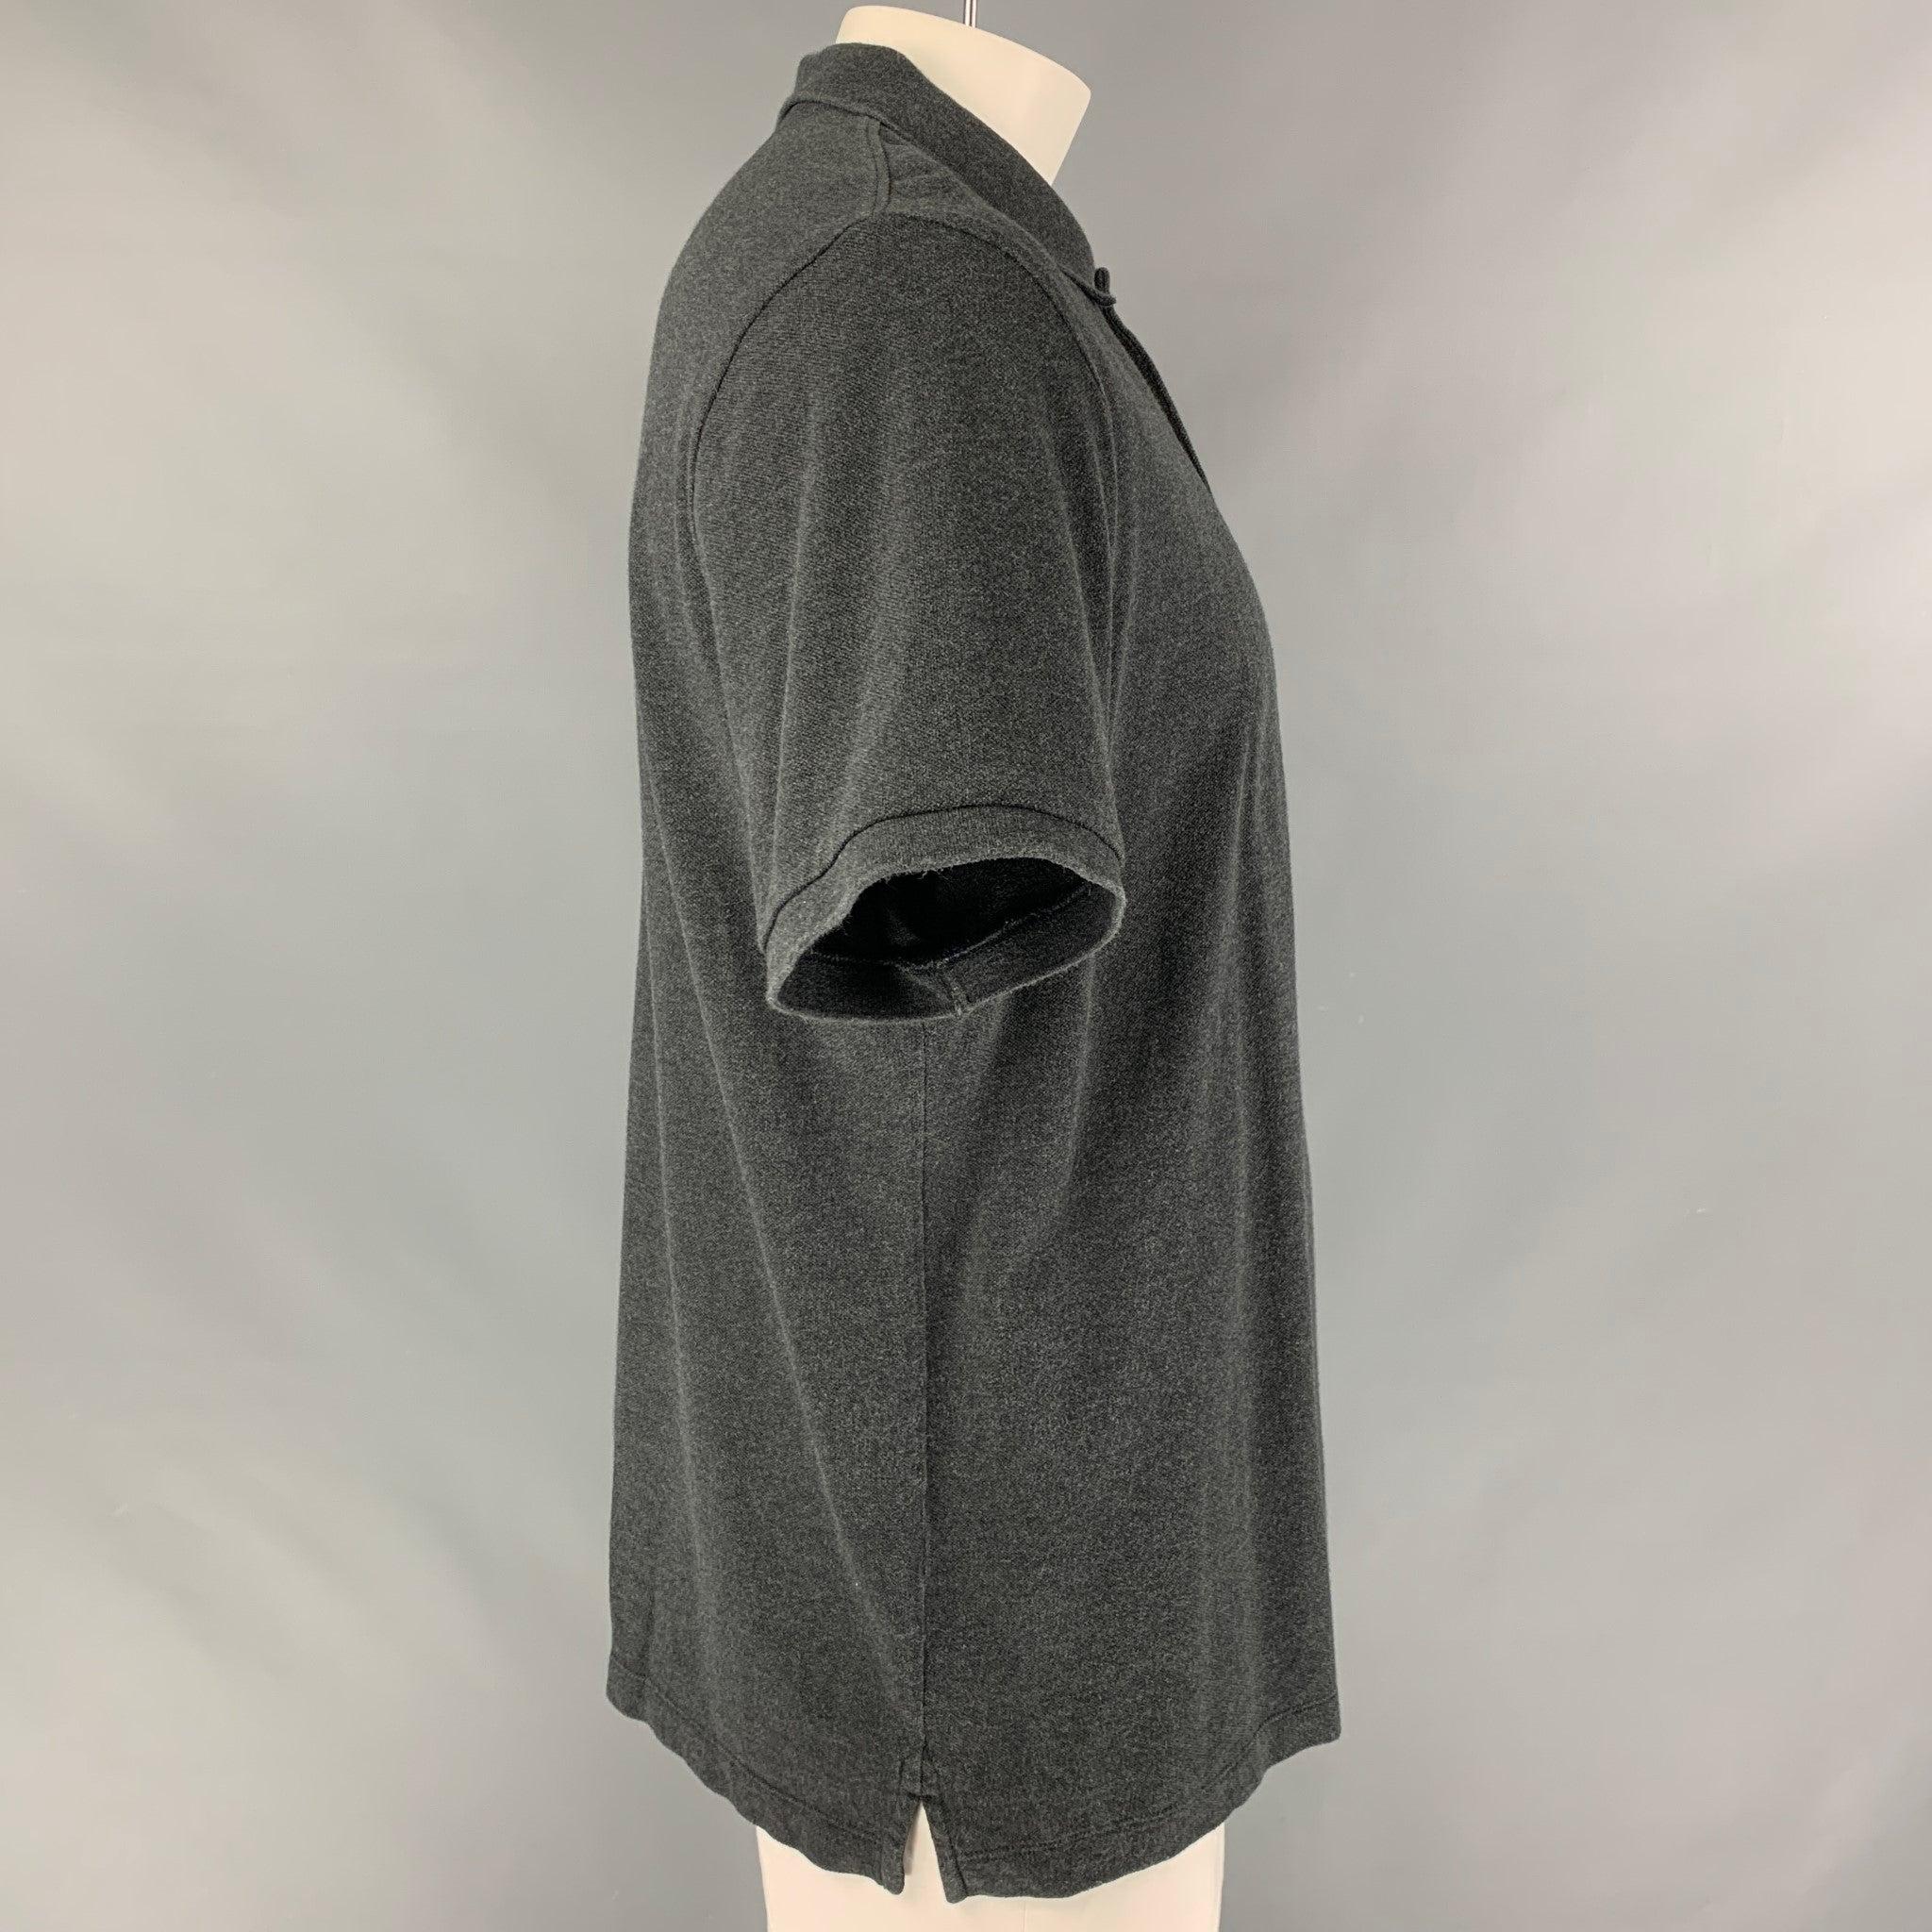 BURBERRY BRIT polo shirt comes in a dark grey cotton piquet featuring the signature plaid trim.
 Very Good Pre-Owned Condition. Minor sign of wear. 

Marked:   XXL 

Measurements: 
 
Shoulder: 20 inches Chest: 50 inches Sleeve: 9.5 inches Length: 29